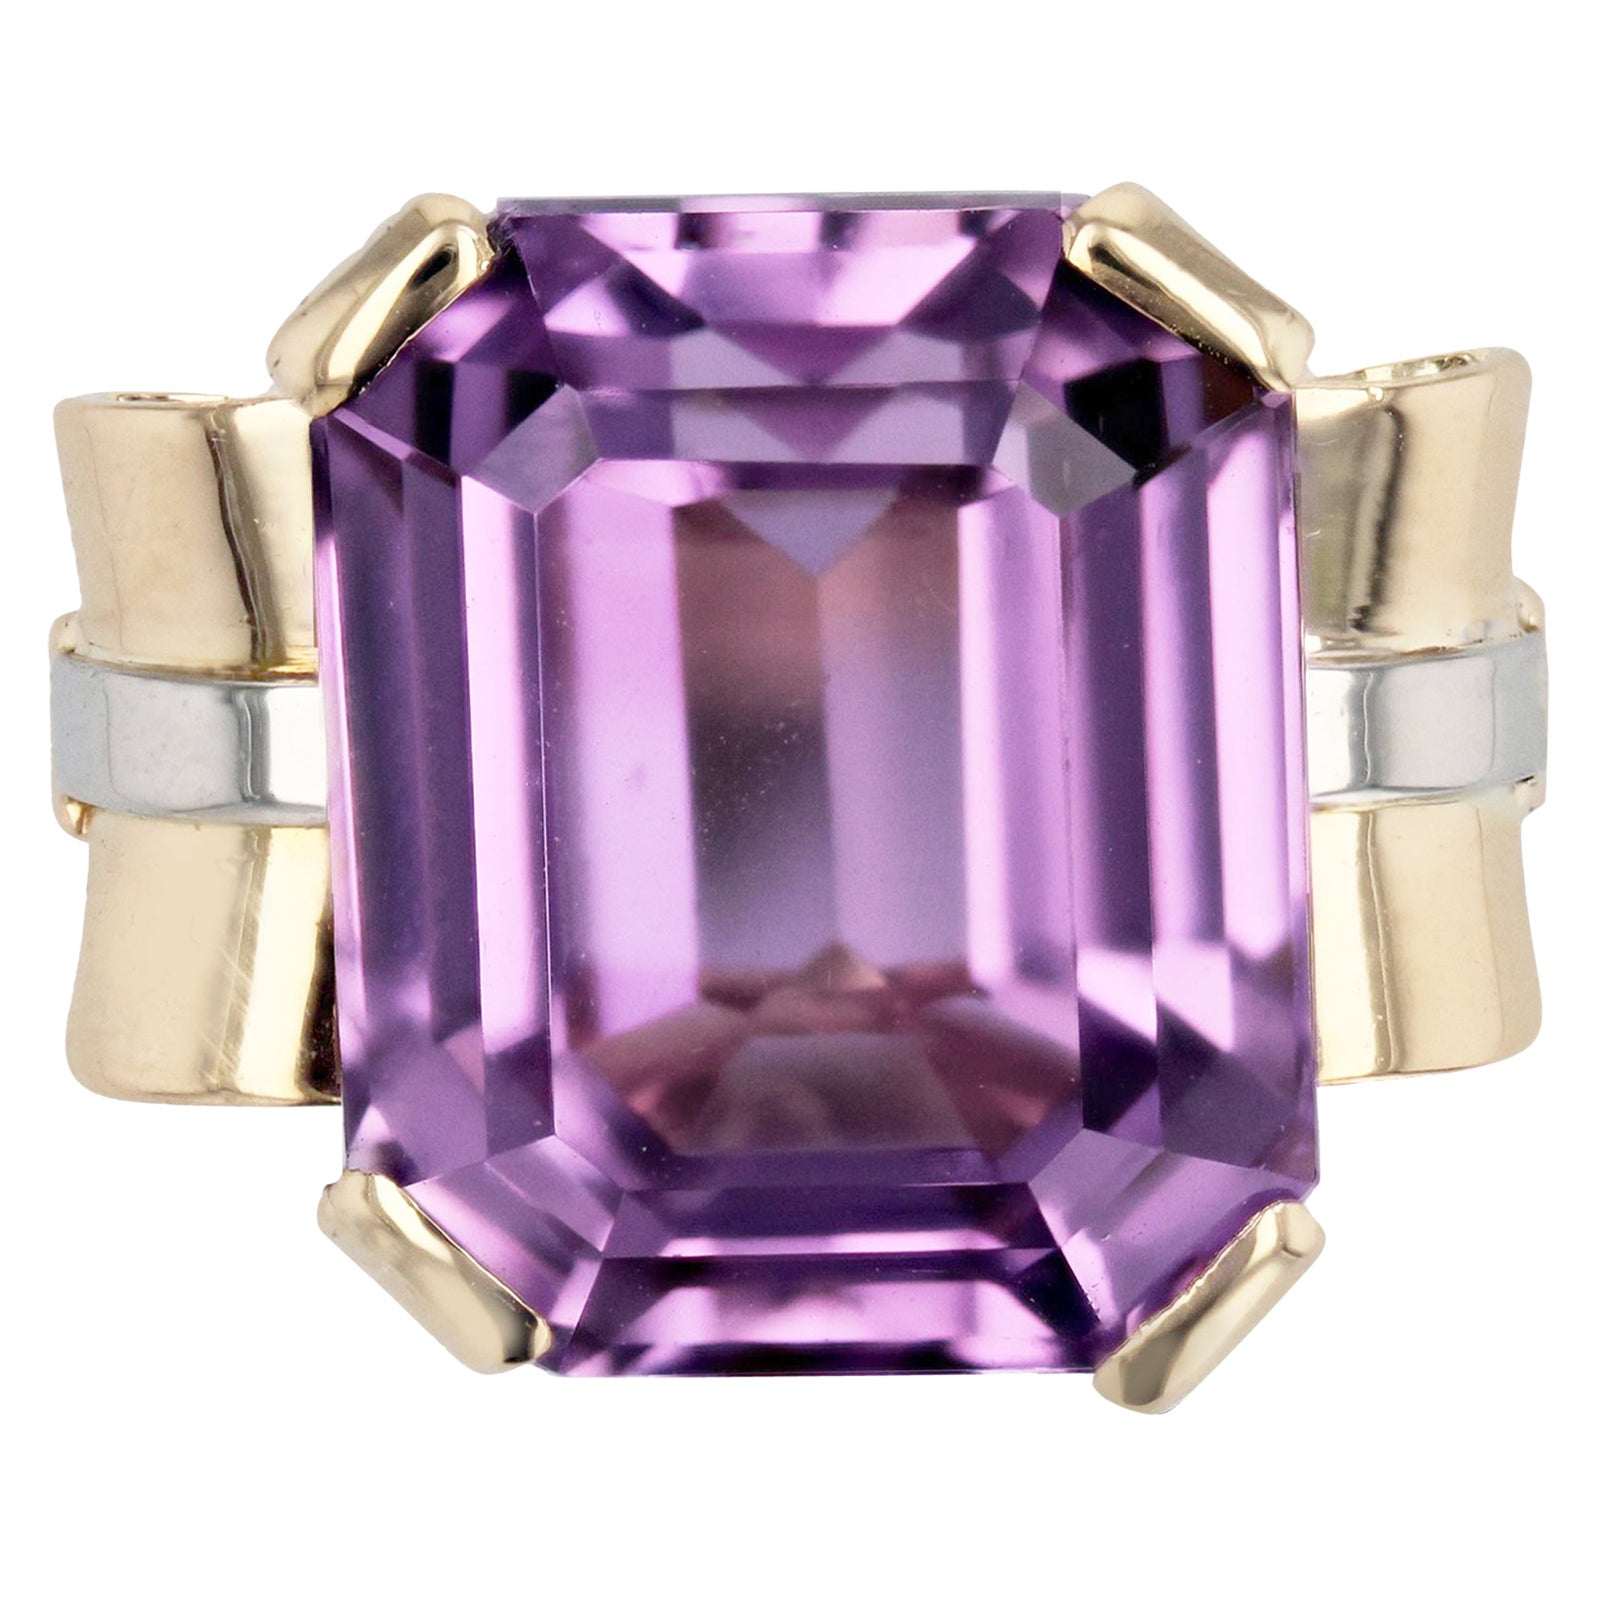 French Retro 1950s 11.29 Carats Kunzite 18 Karat Yellow Gold Cocktail Ring For Sale